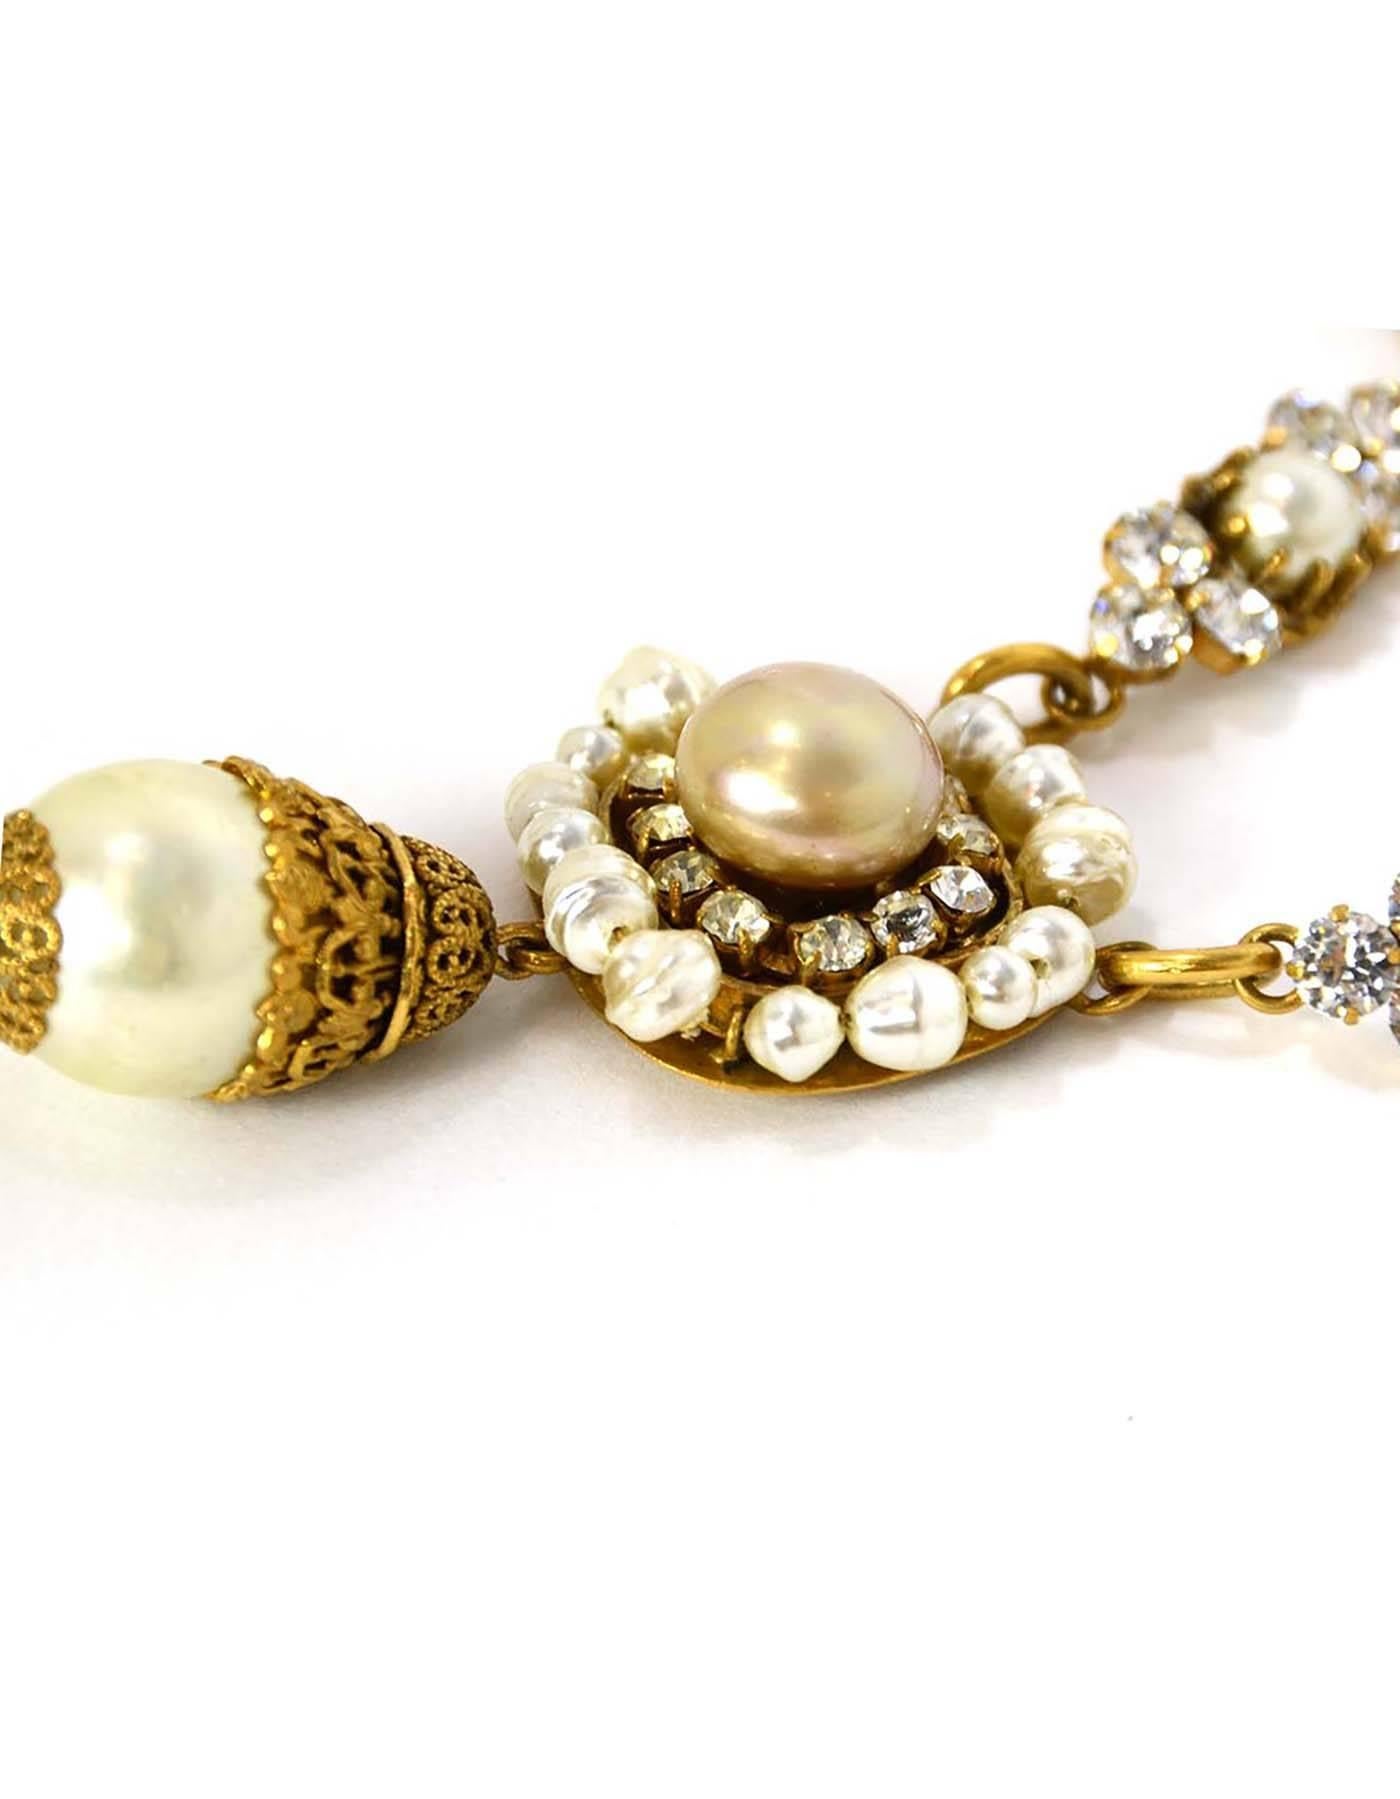 Women's Chanel Vintage 50's-60's Pearl & Strass Crystal Necklace